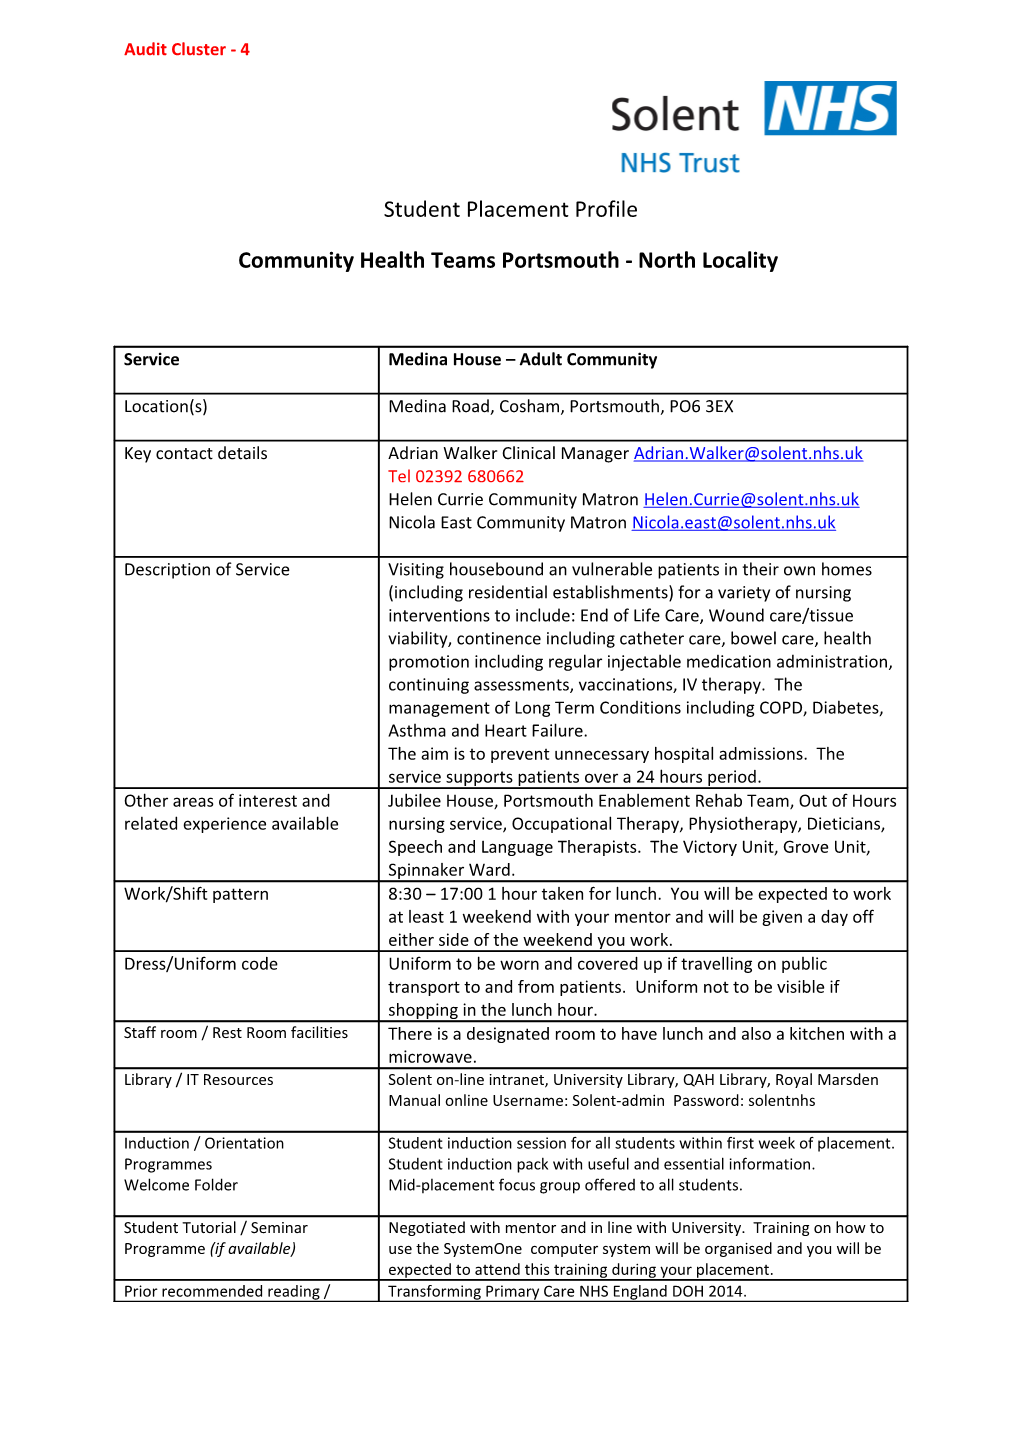 Community Health Teams Portsmouth - North Locality